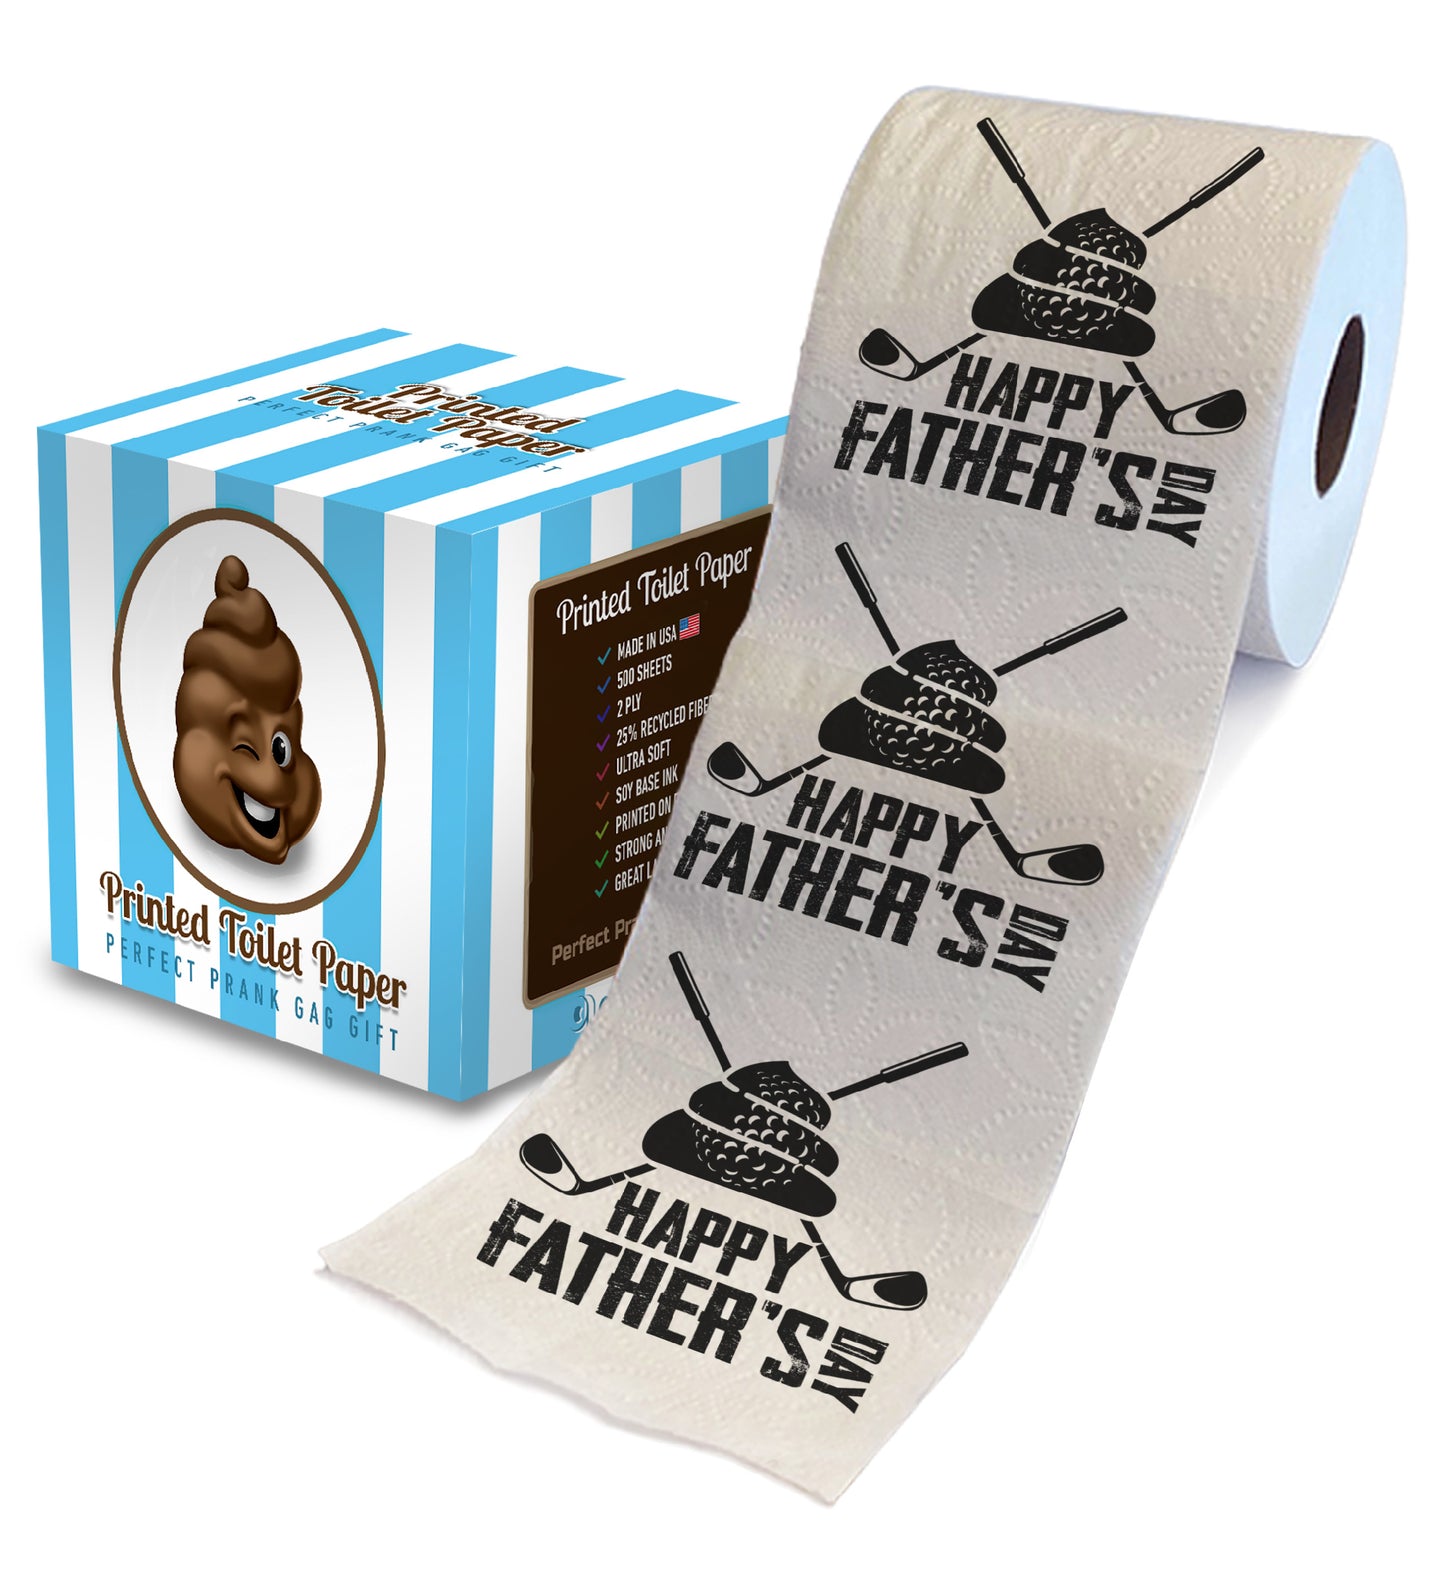 Printed TP Happy Fathers Day Golf With My Poop Printed Toilet Paper, 500 Sheets